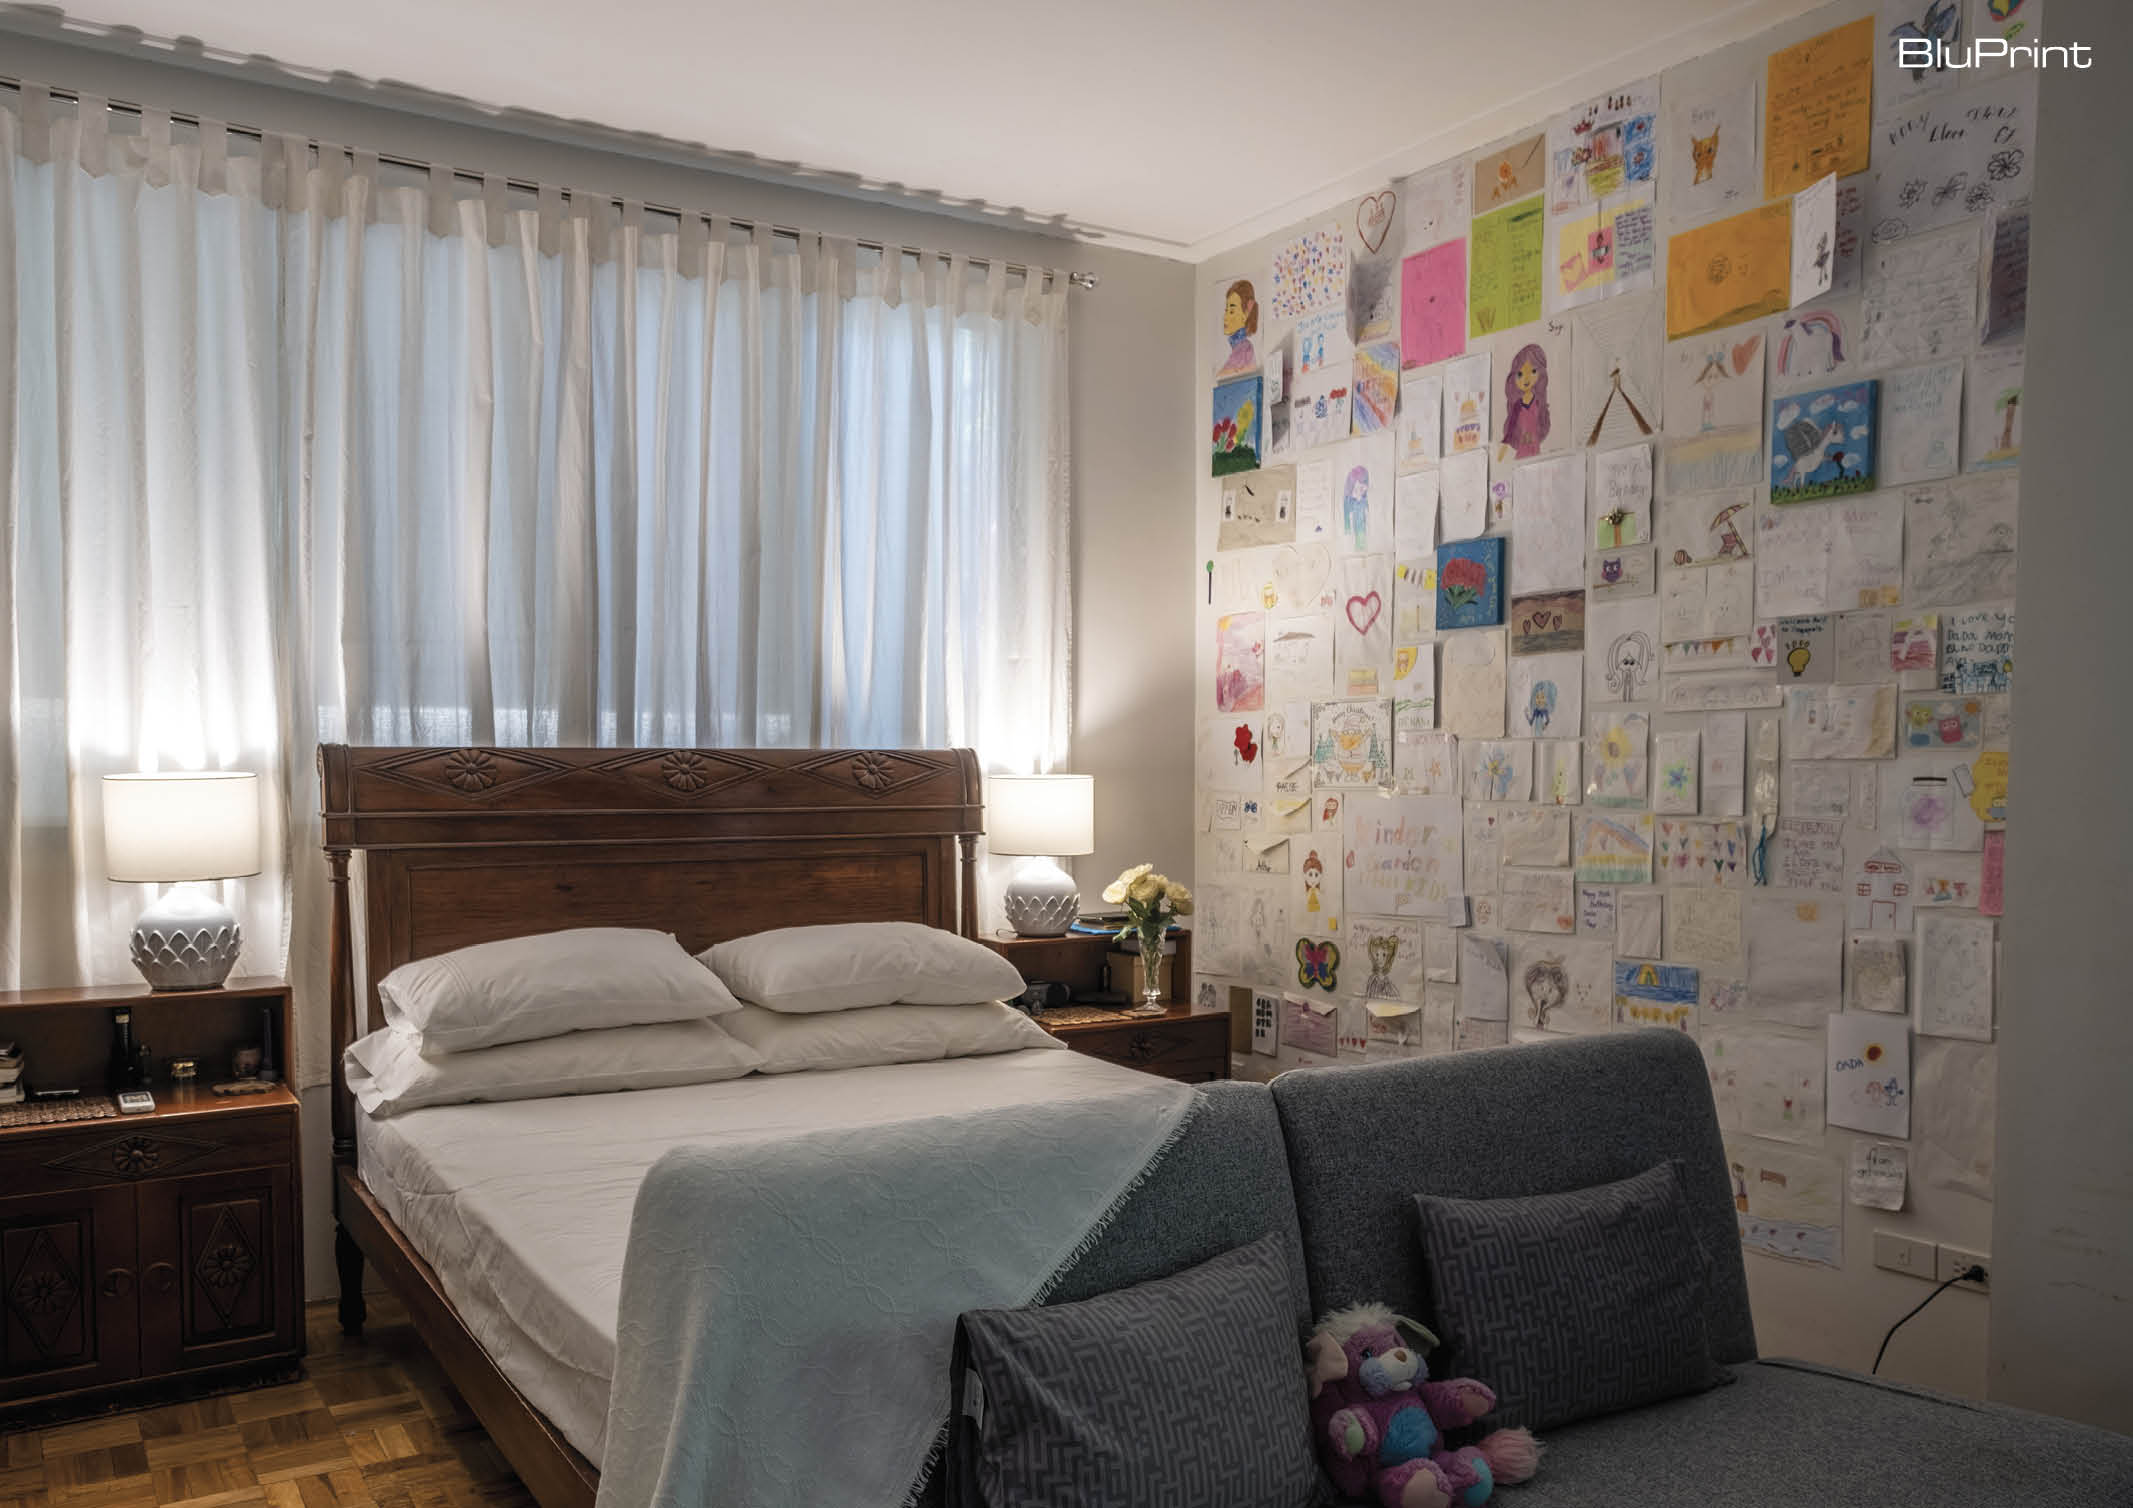 A kid's bedroom with a wooden bed frame and side tables. A two-seater couch is at the foot of the bed, and a wall displays the child's art work